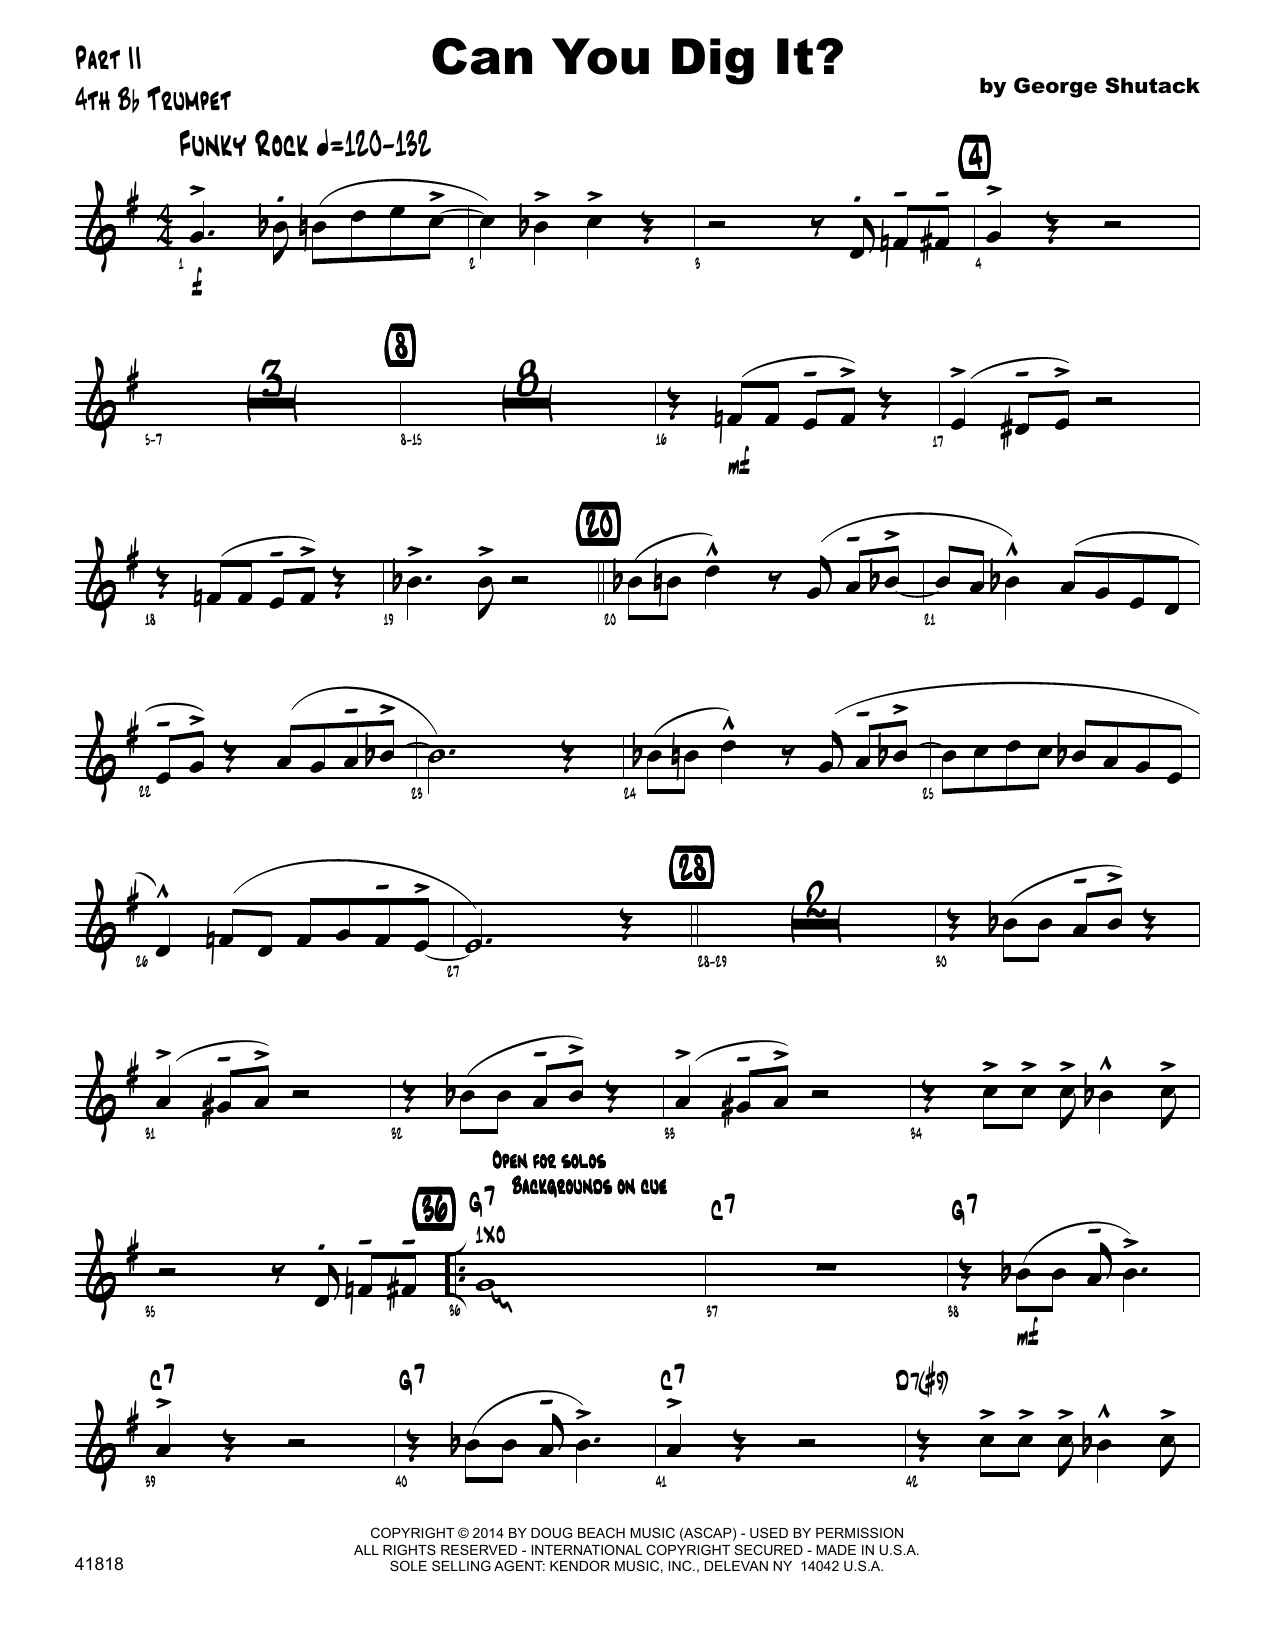 Download George Shutack Can You Dig It? - 4th Bb Trumpet Sheet Music